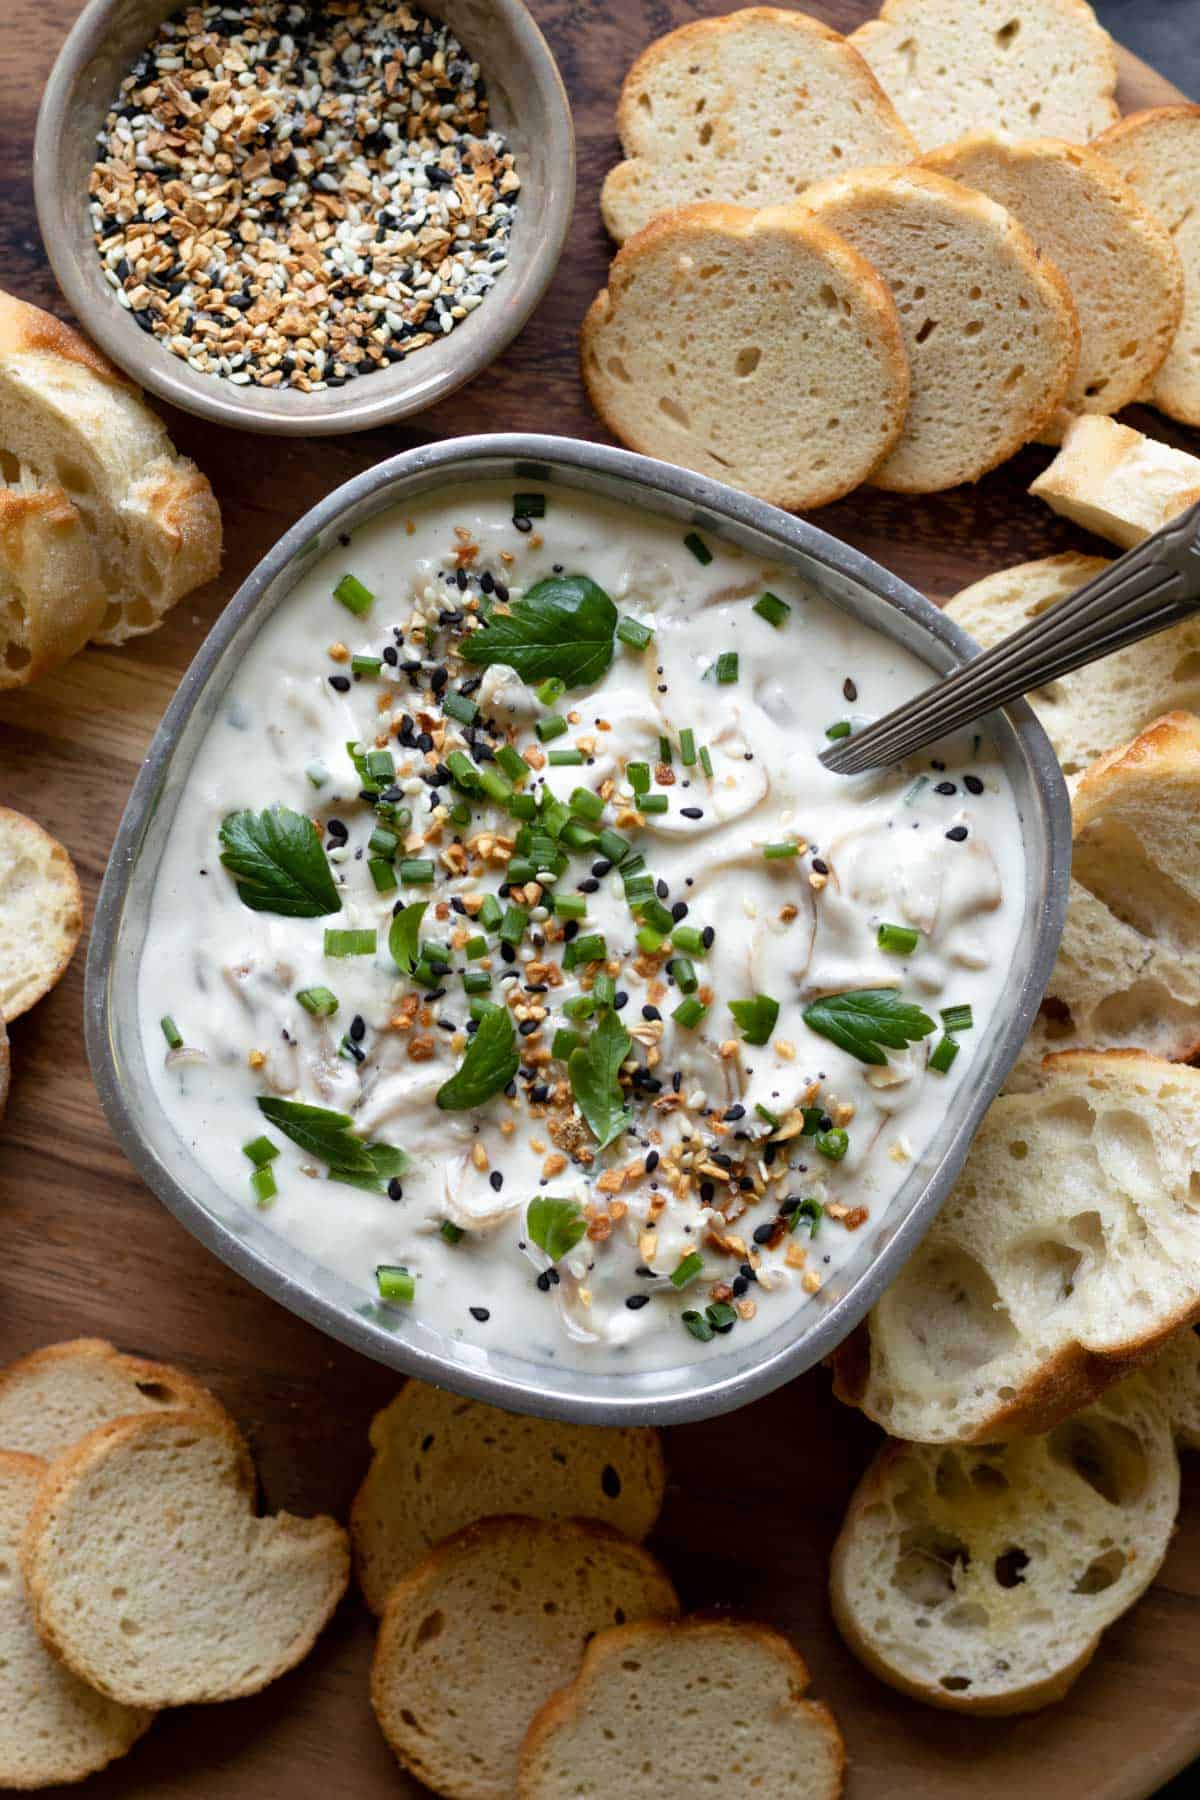 Rich and creamy dairy-free caramelized onion dip, topped with chives and toasted everything bagel seasoning. #vegan #partyfood #oniondip #shallotdip #vegansourcream Dips for charcuterie boards. 